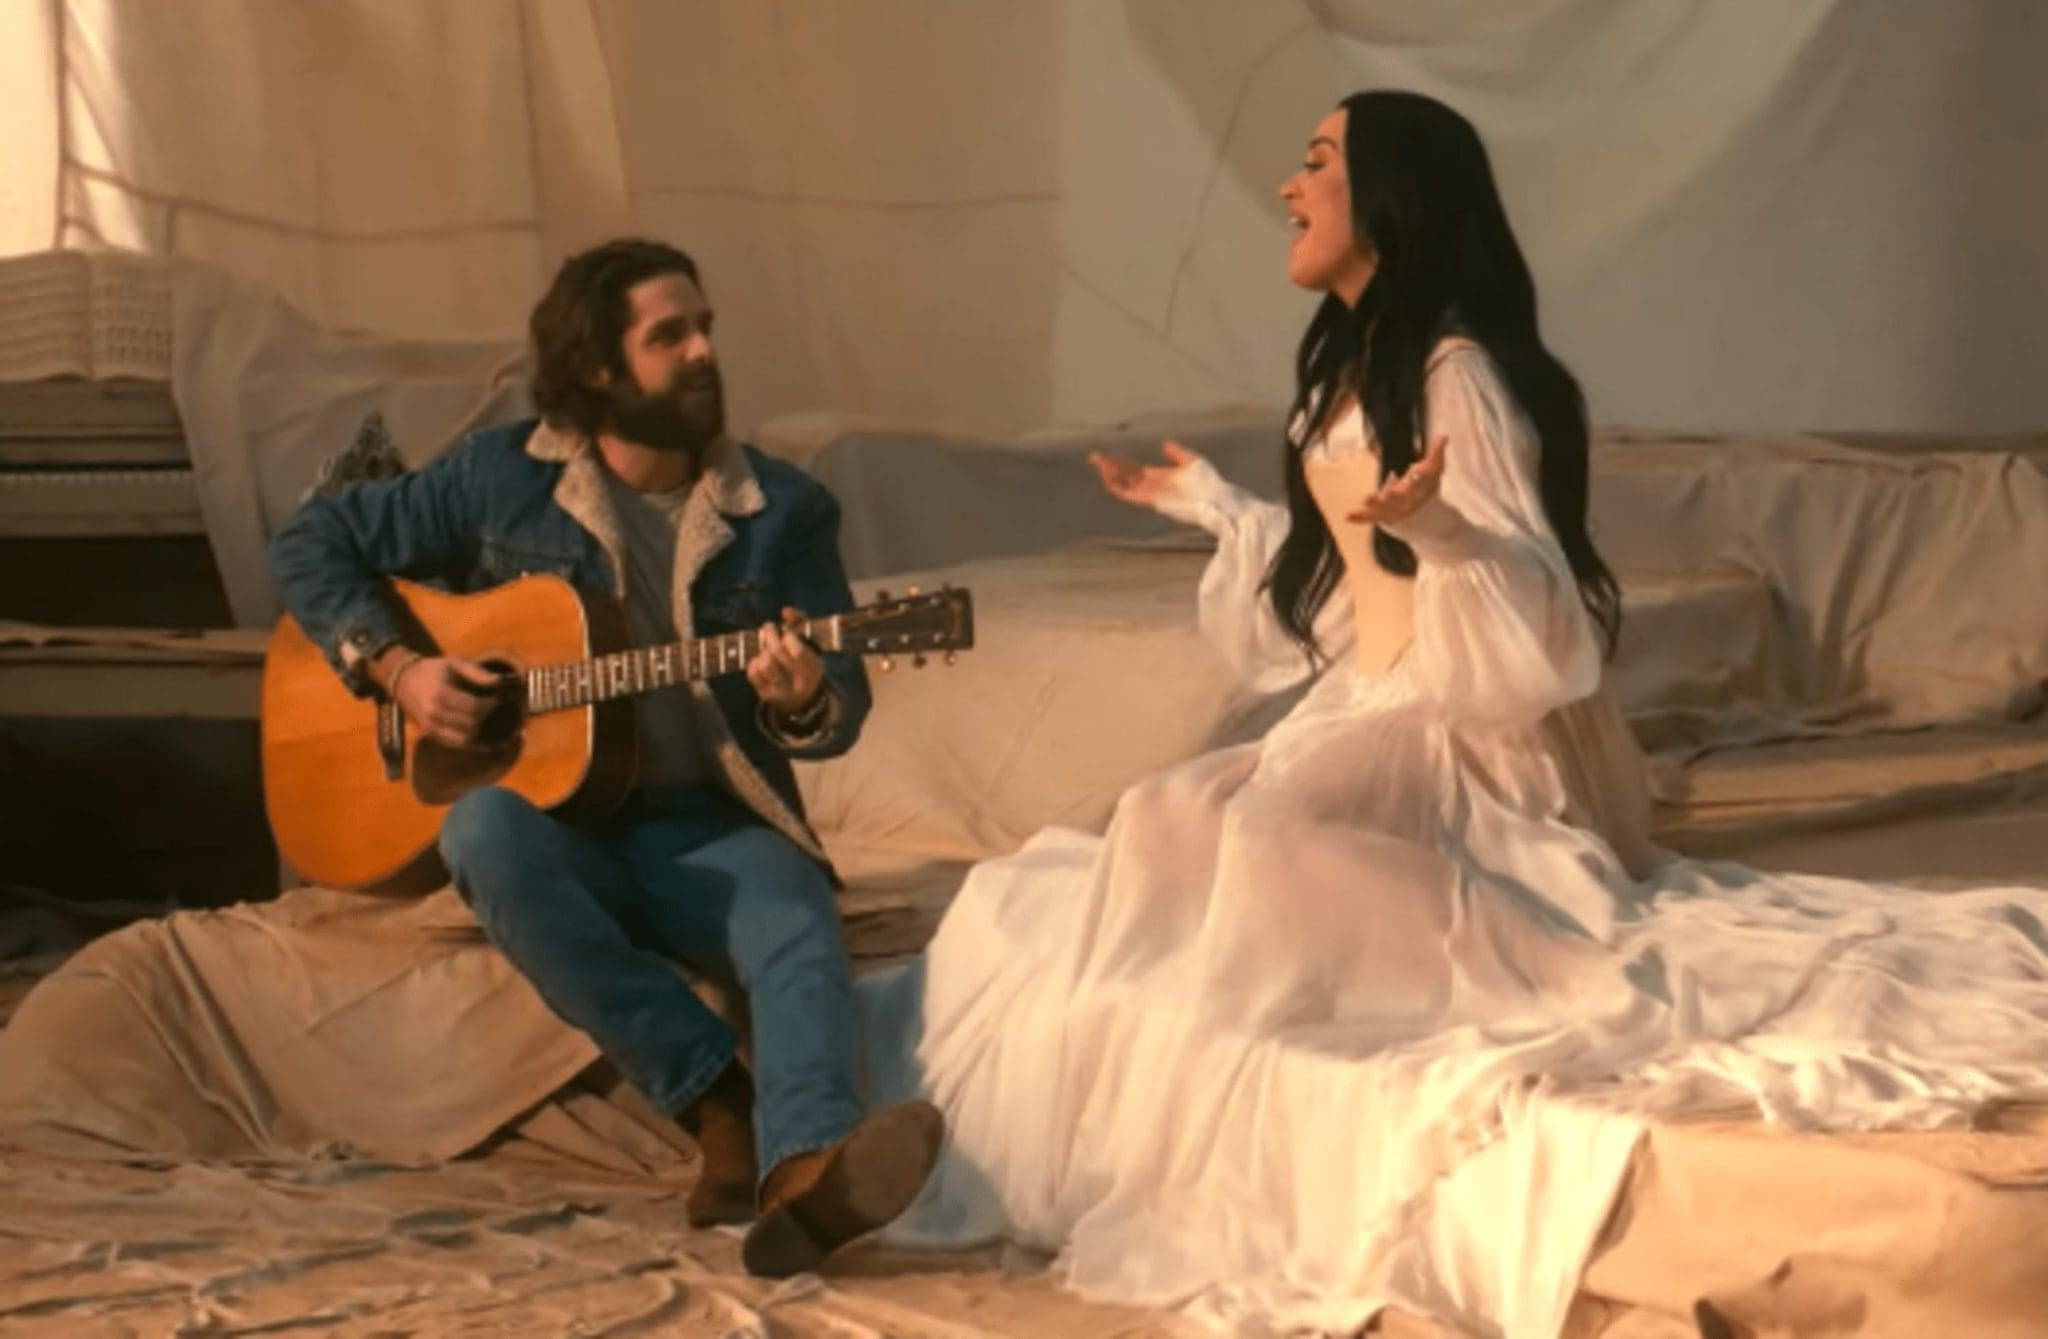 Where We Started Music Video Features Katy Perry And Thomas Rhett's Reflective Look Back At Their Individual Journeys